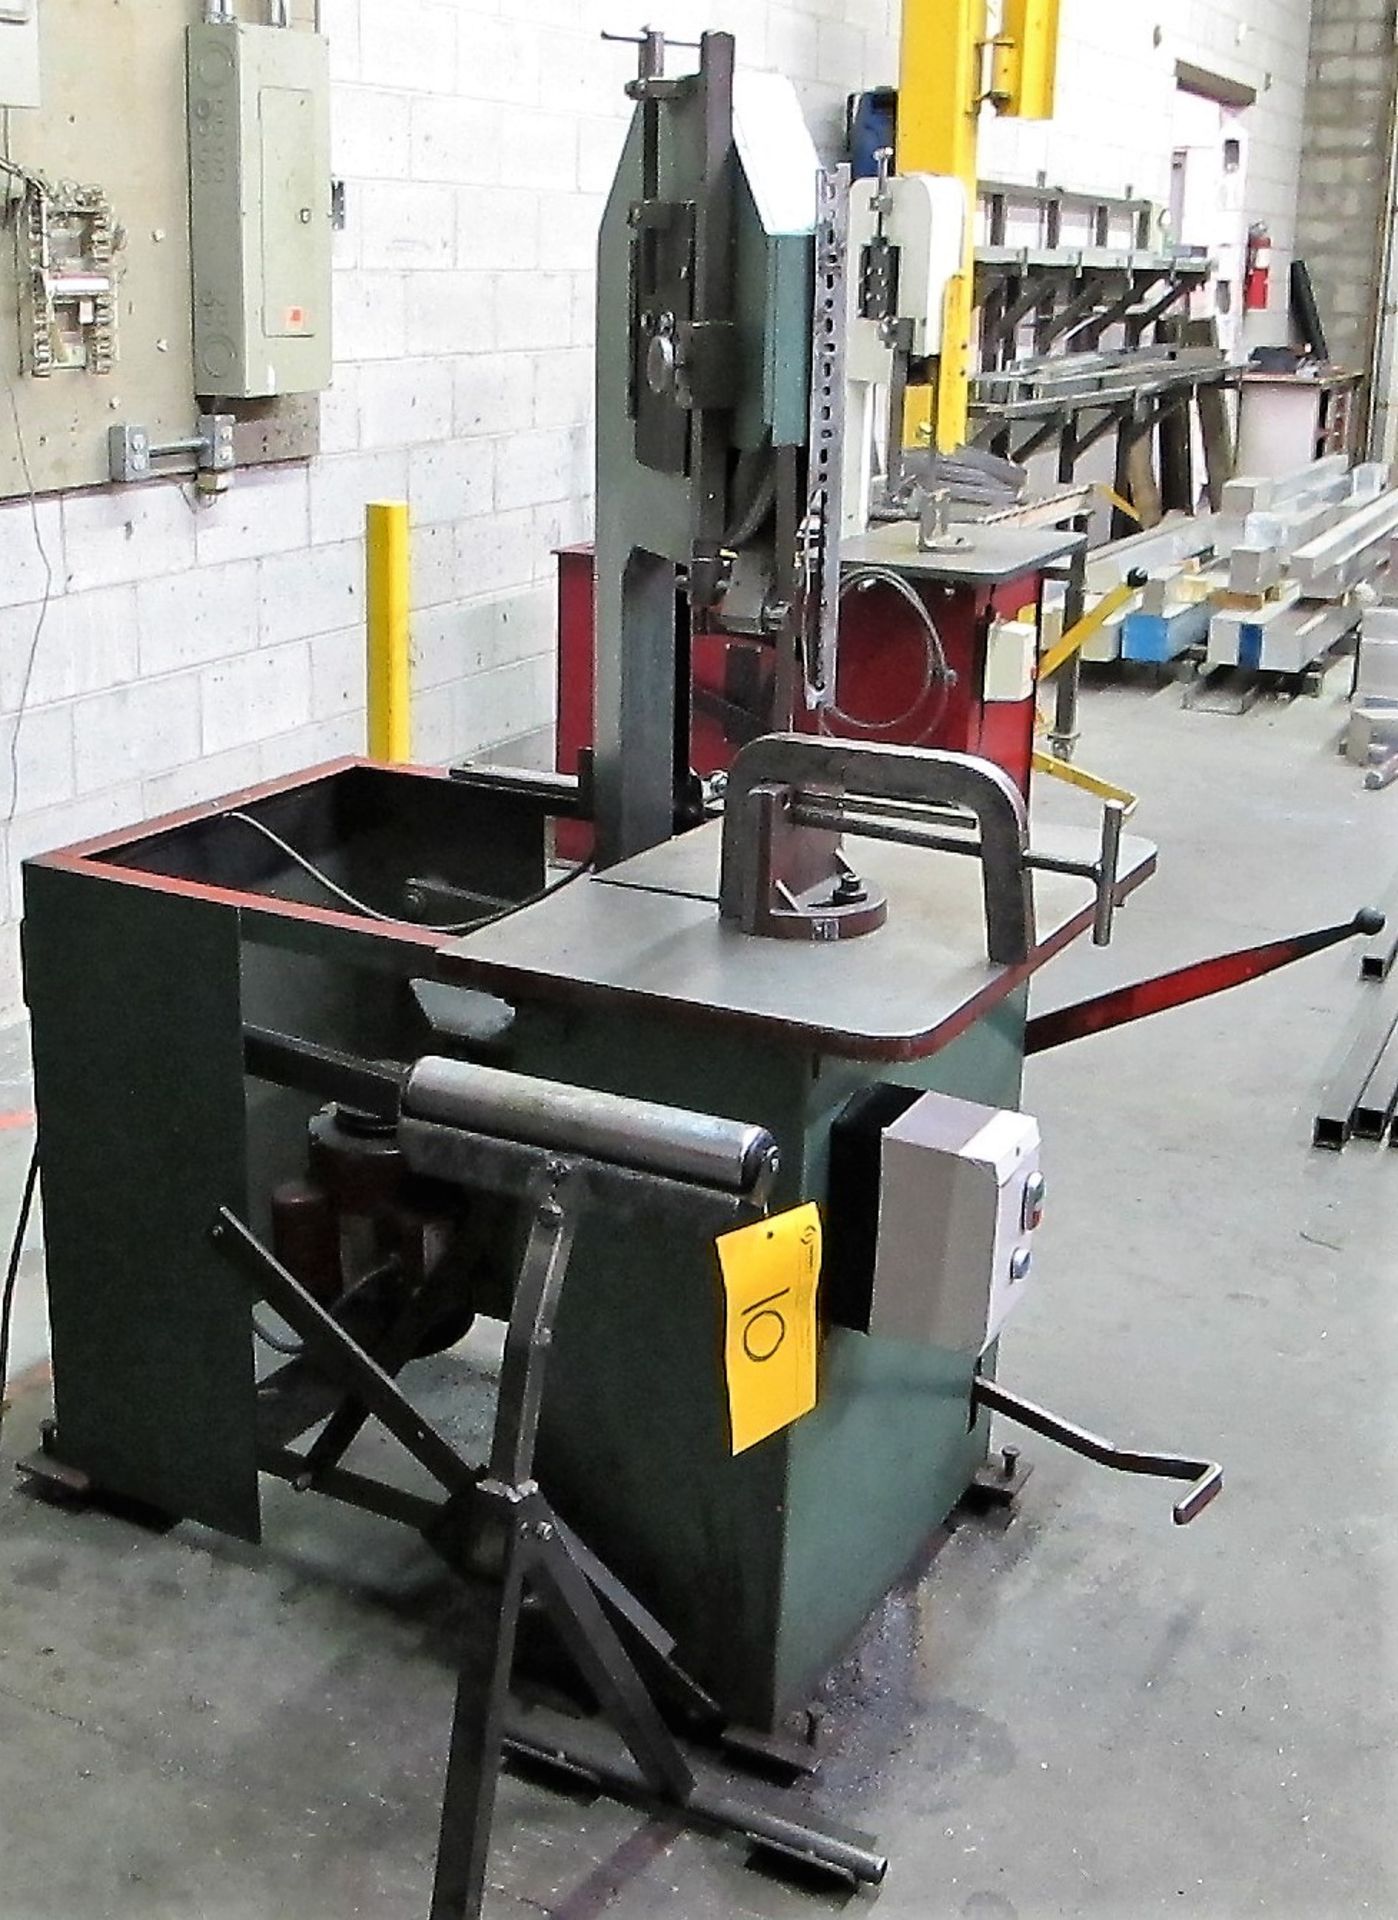 E-R MAIER MFG CO, KM 1012 ROLL IN BAND SAW W/ROLLER STAND, S/N 62894 - Image 3 of 3